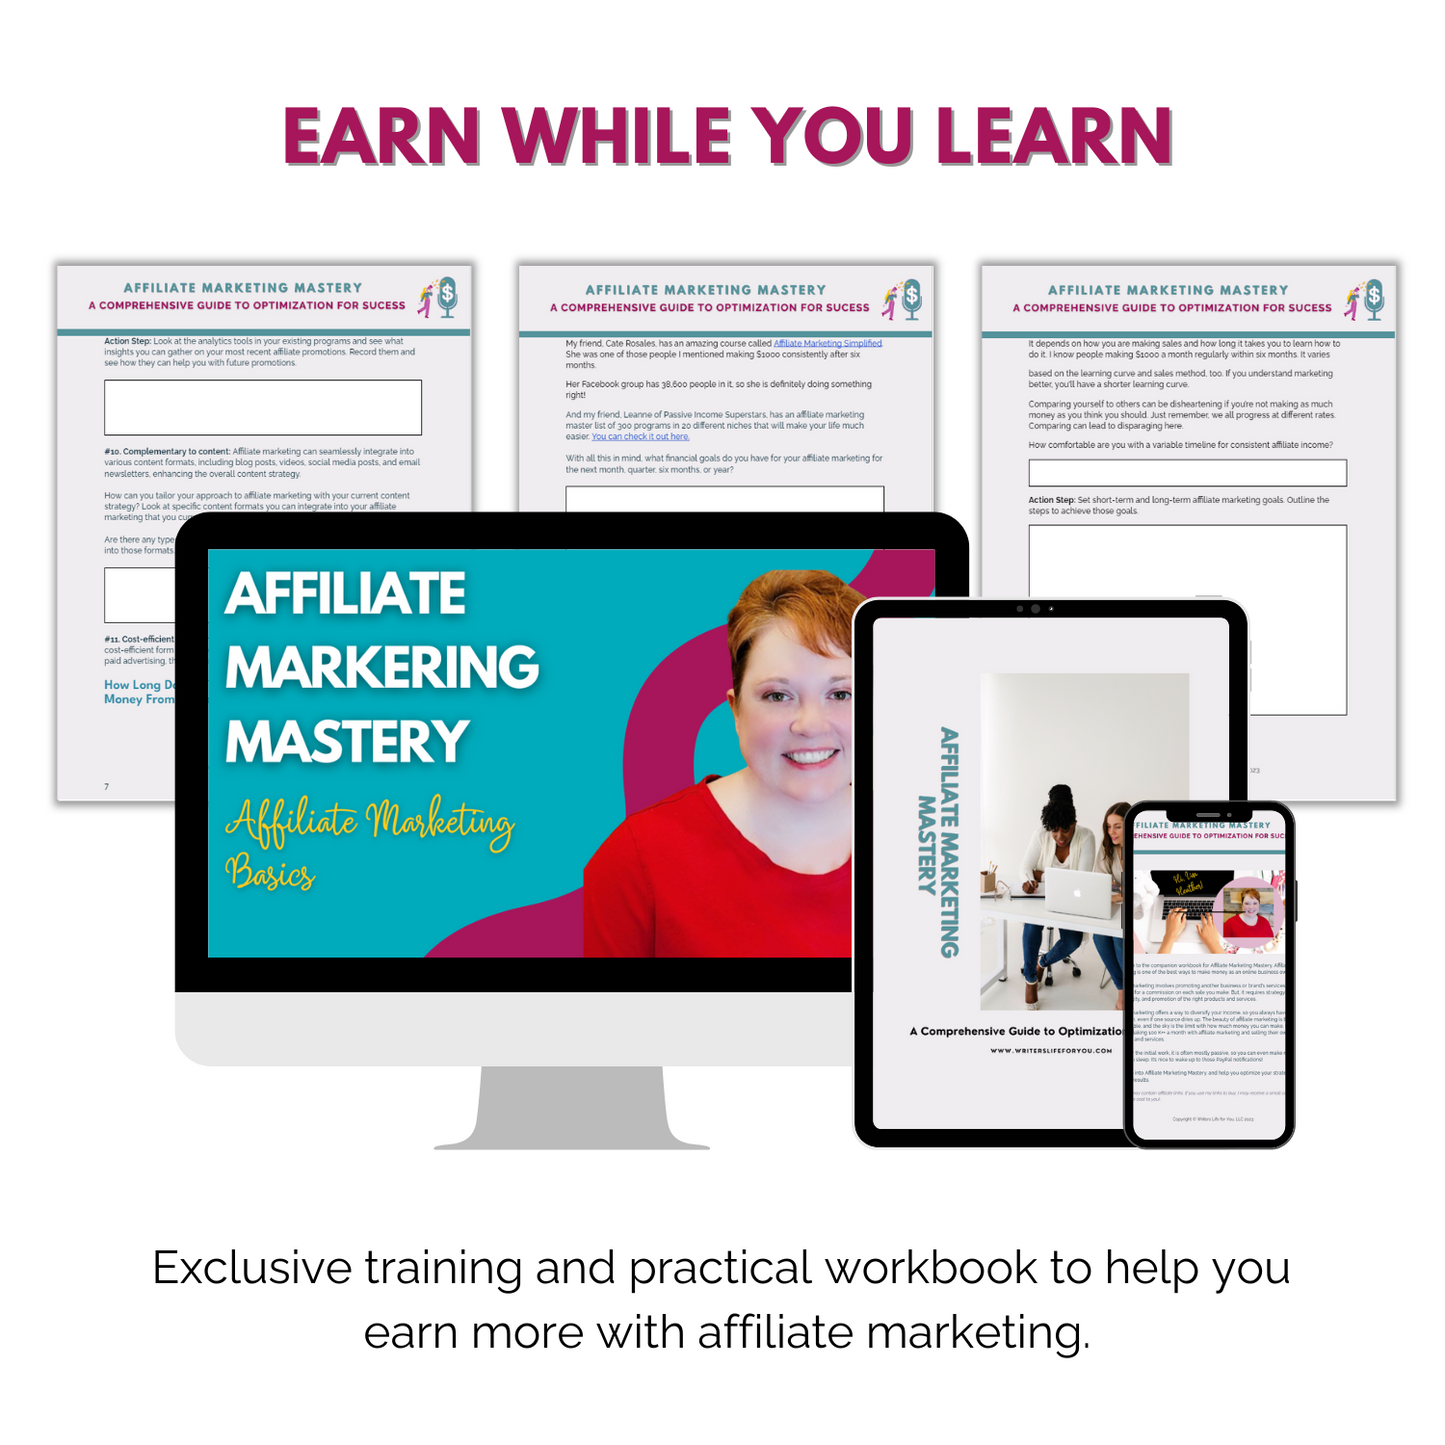 Advertisement for "Affiliate Marketing Mastery: A Comprehensive Guide to Optimization for Success" by ContentPreneur Biz Shop, featuring various digital devices displaying course content, a female instructor, and a slogan "earn while you learn with content monetization.